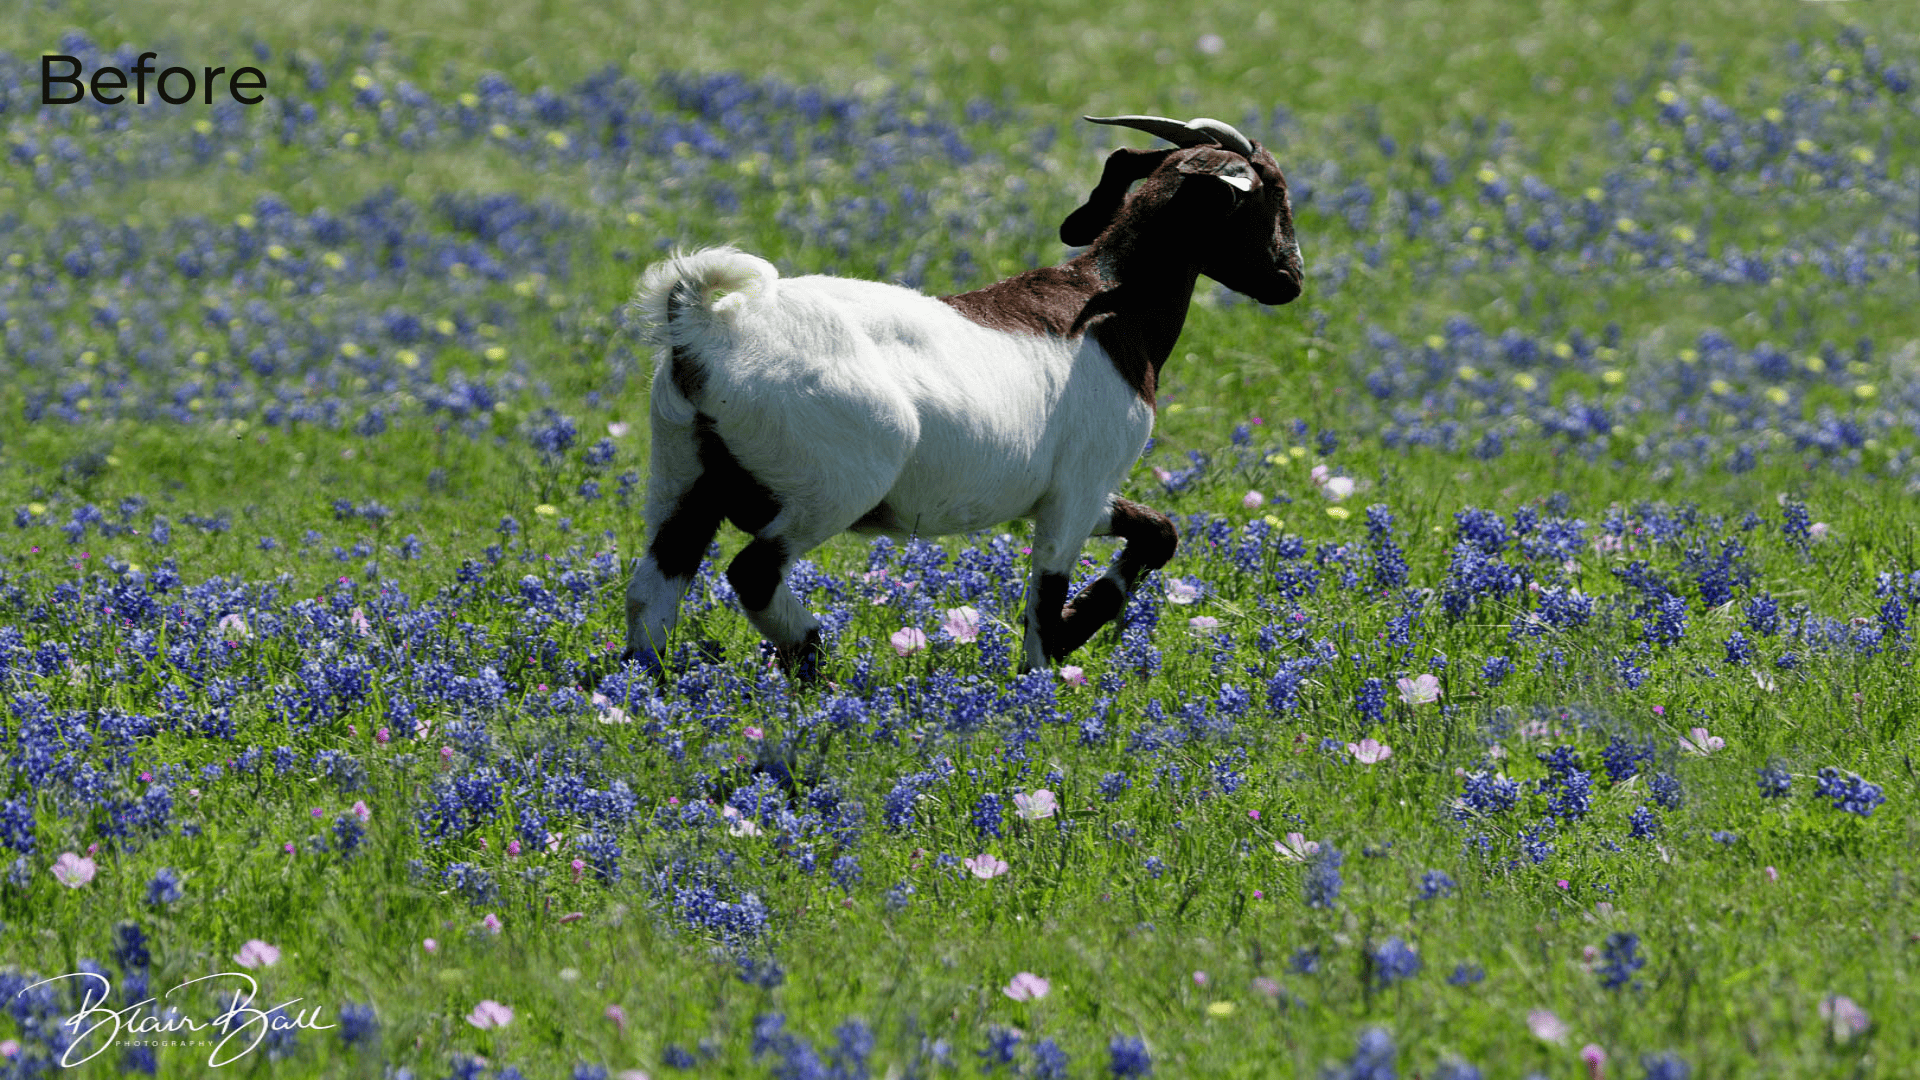 Texas Goat in Field of Bluebonnets - Before - ©Blair Ball Photography Image